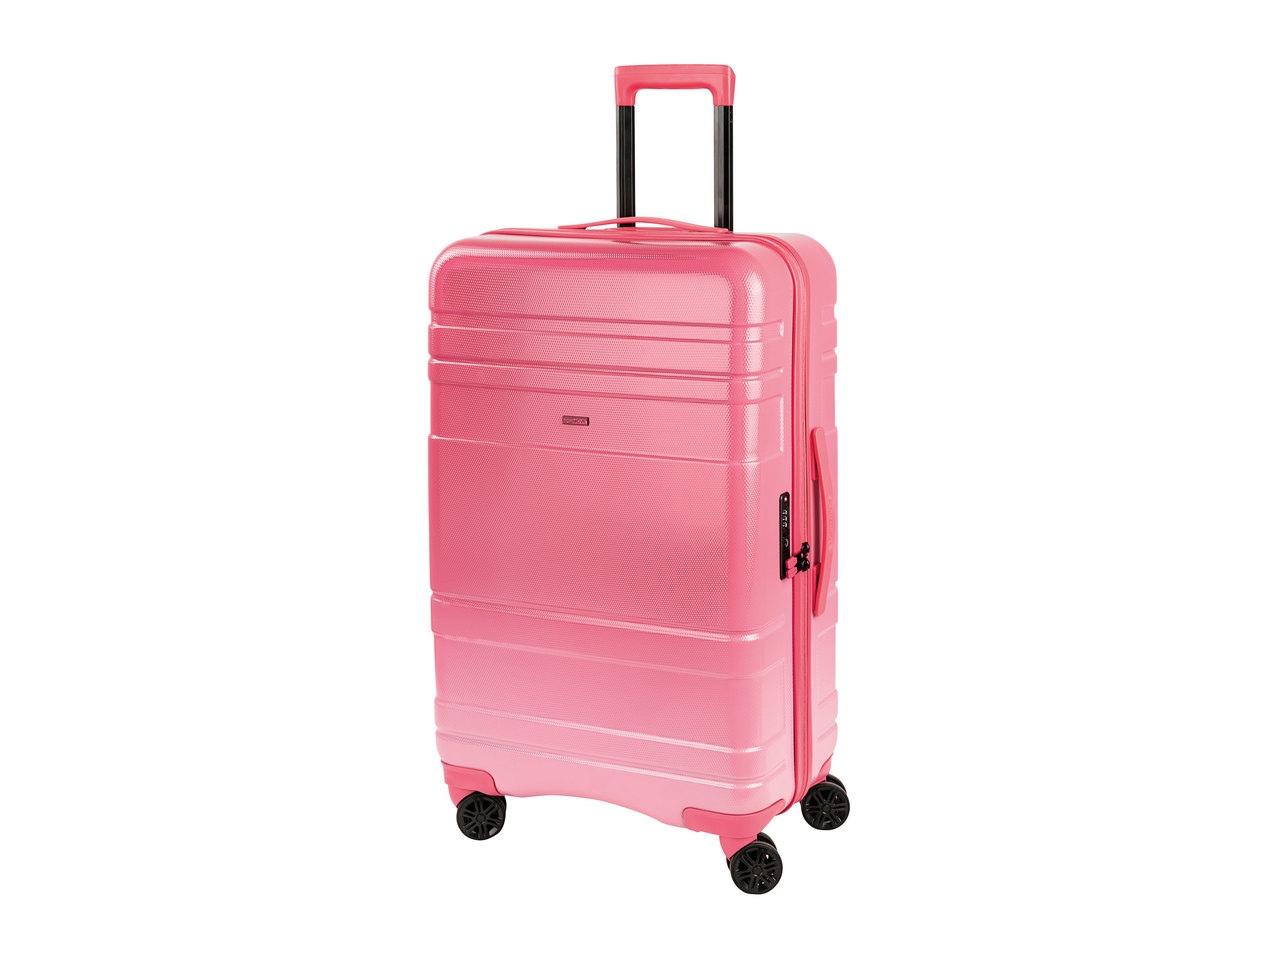 Top Move Pink Trolley Suitcase1